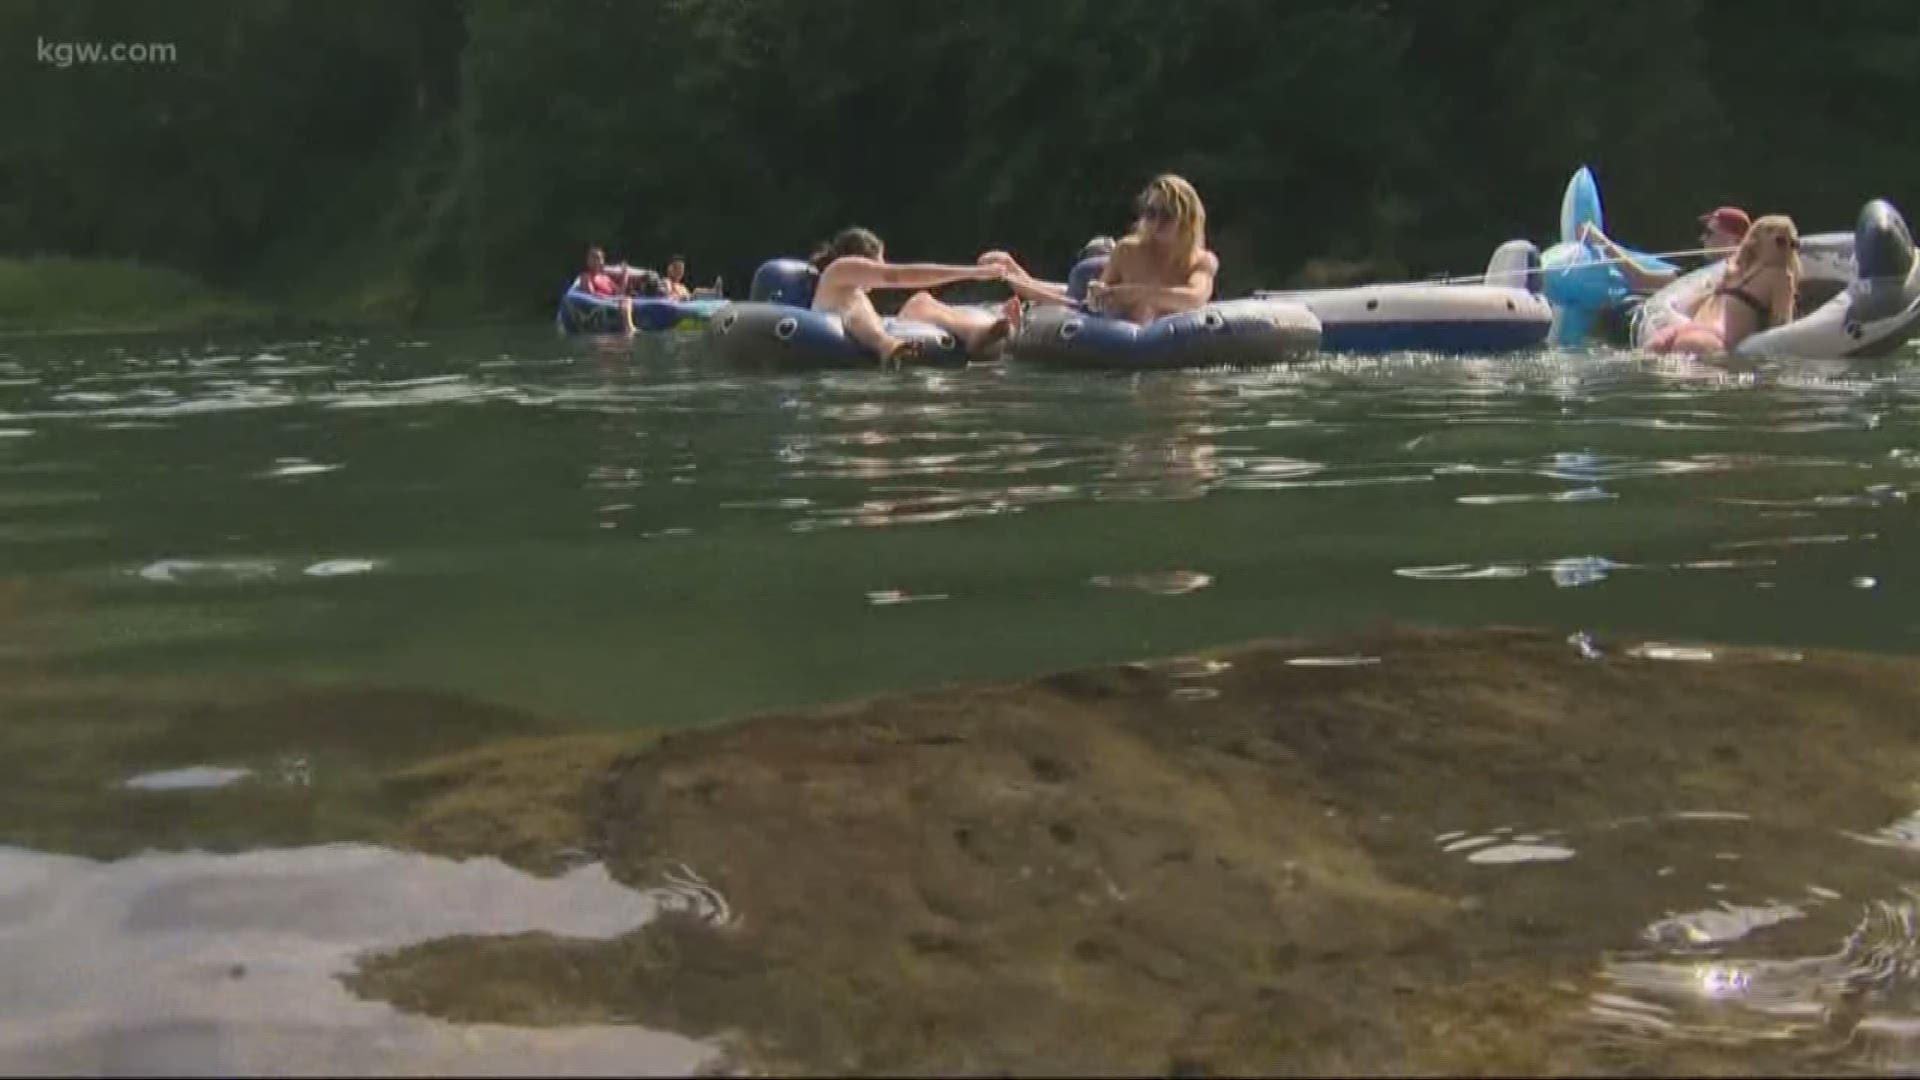 Lost and found. How a man found a woman’s prosthetic leg in the Clackamas River.